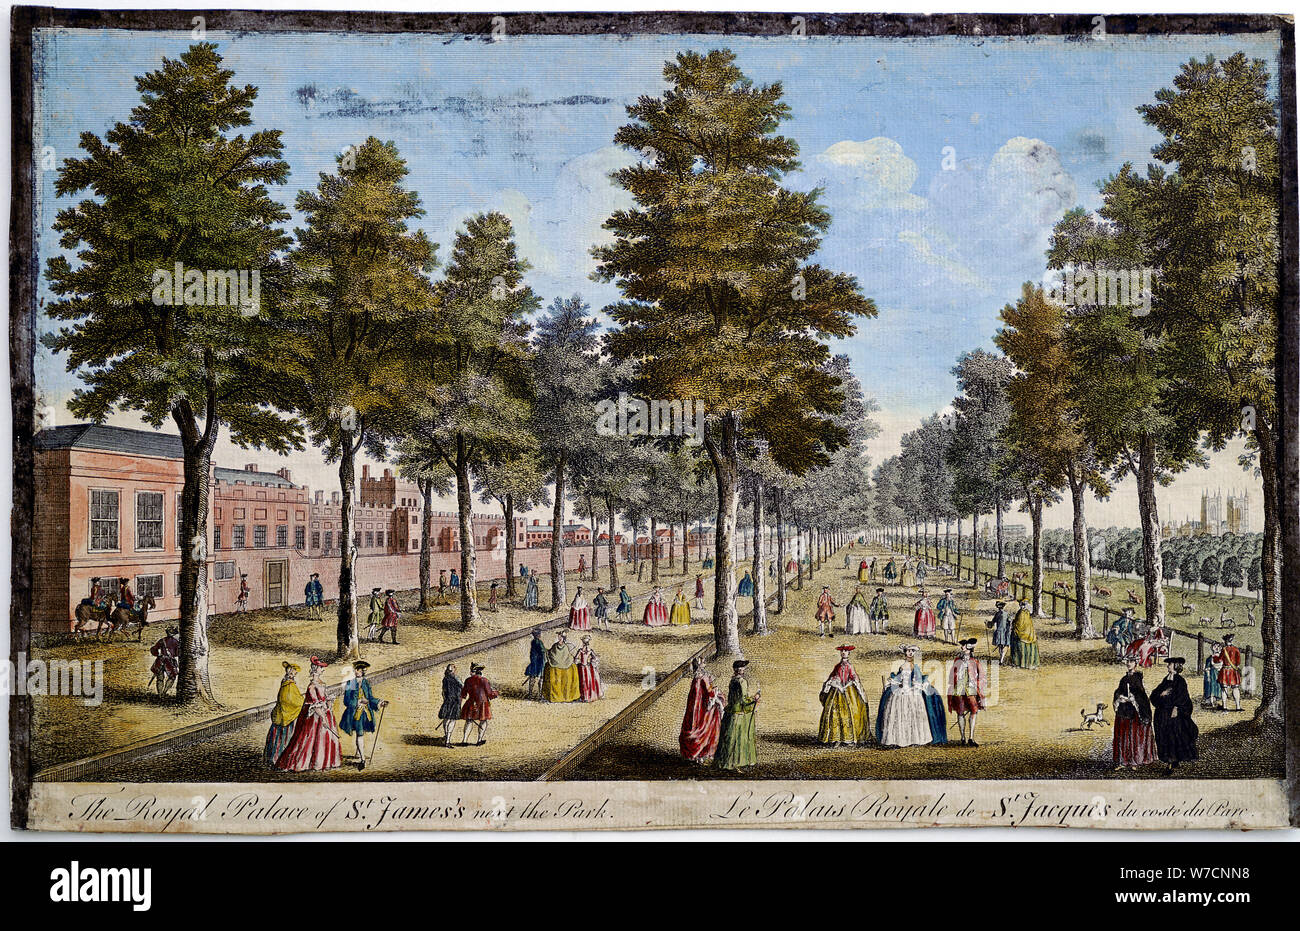 St James' Palace and Park, London, showing formal planting of trees in avenues, 1750. Artist: Unknown Stock Photo